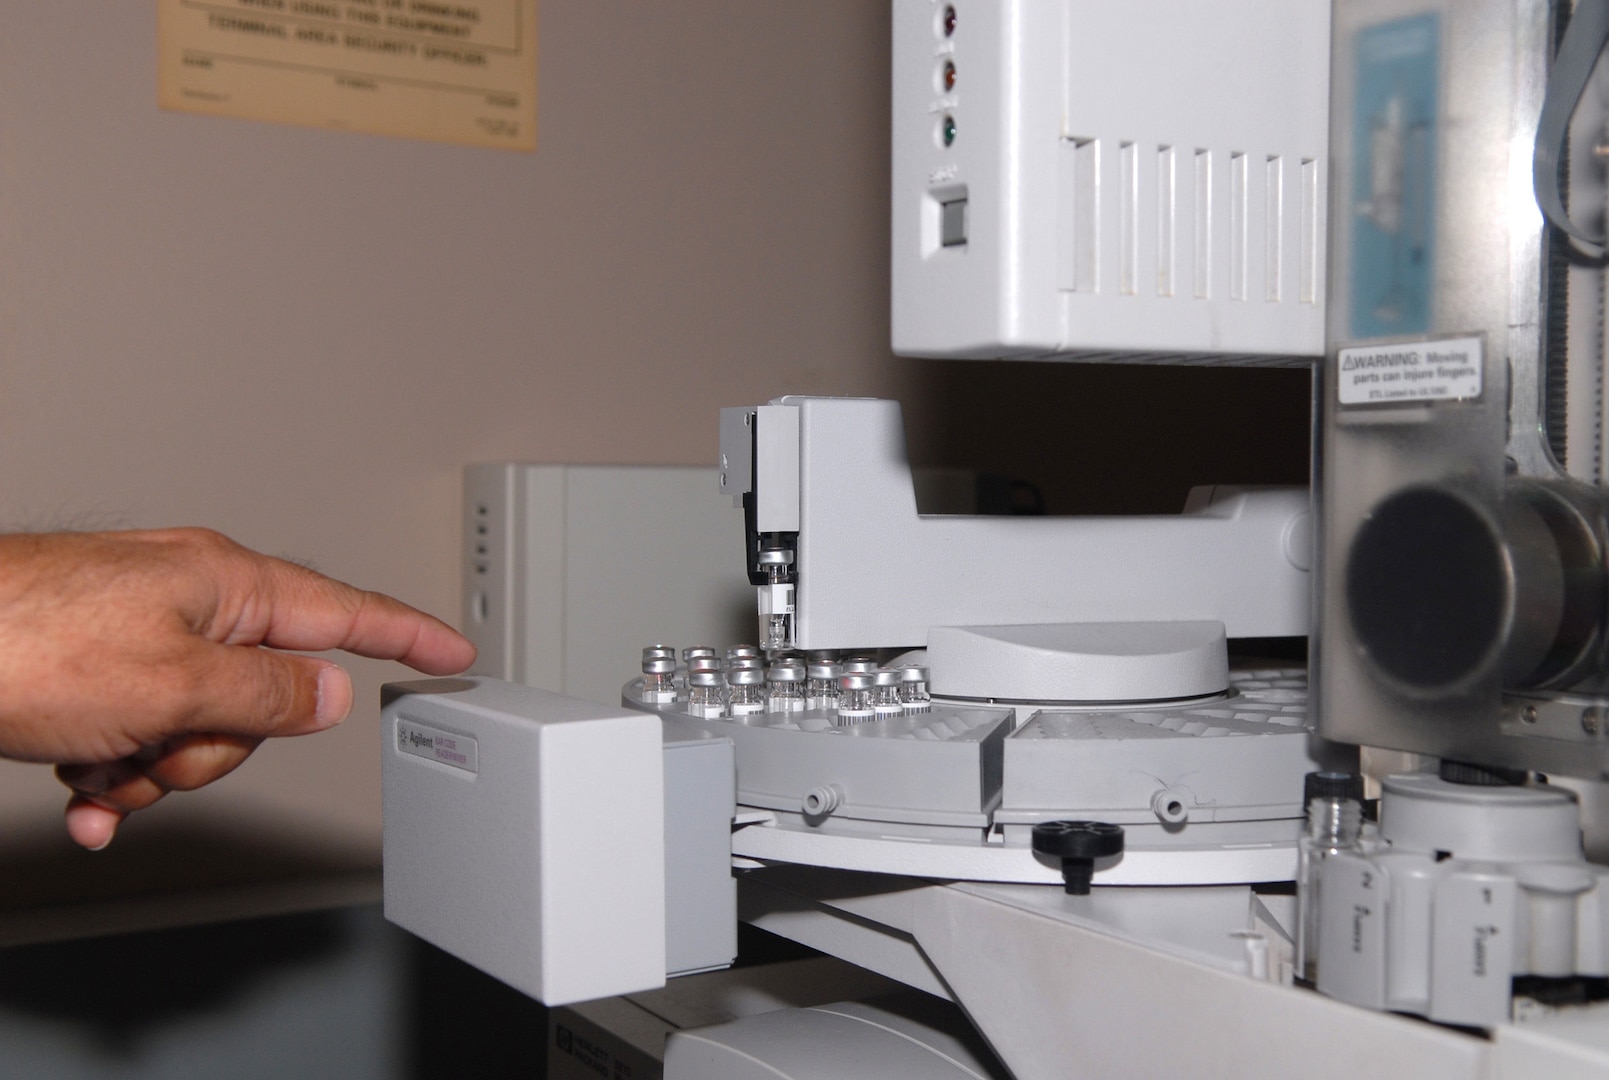 A lab specialist at the military drug testing facility in Texas points out samples prepared for analysis with a gas chromatograph/mass spectrometer. The military laboratory's high-tech equipment can find and identify any drugs present.